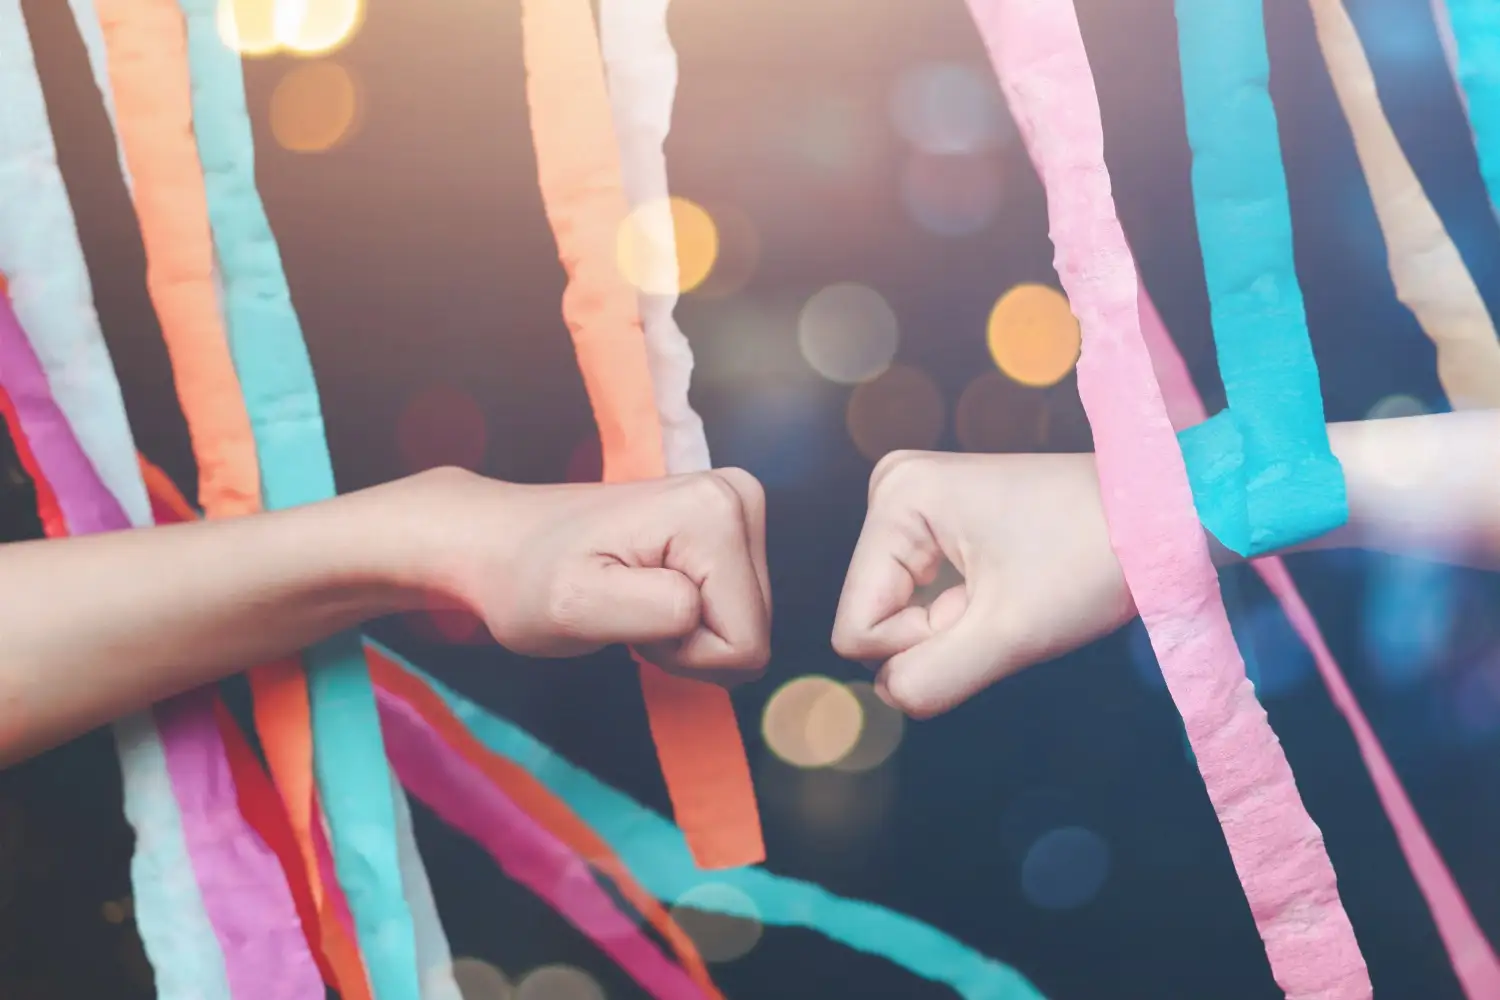 Two hands fist bumping under streamers of a rainbow color